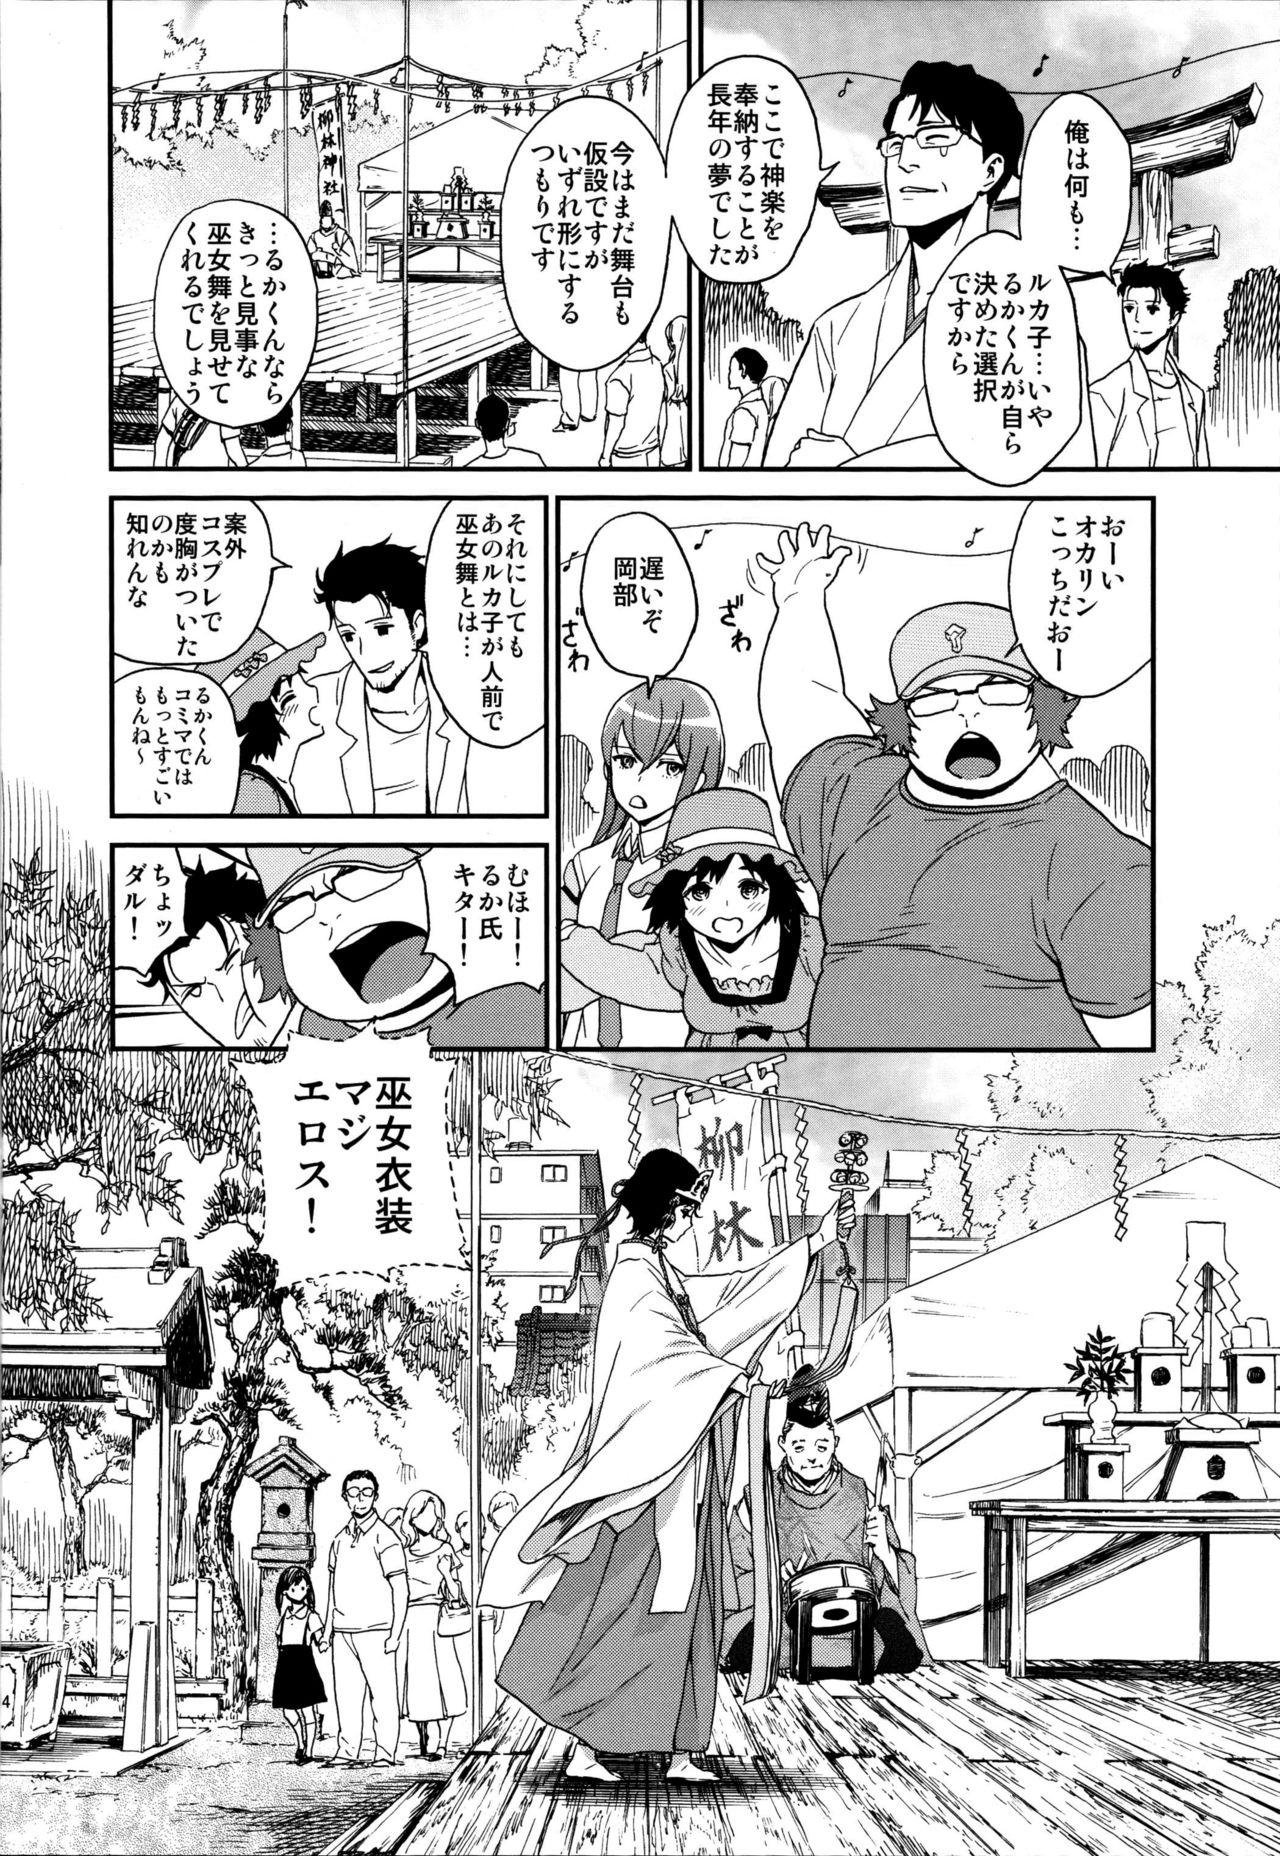 And Yaotome no Chrysanthemum - Steinsgate Solo - Page 3